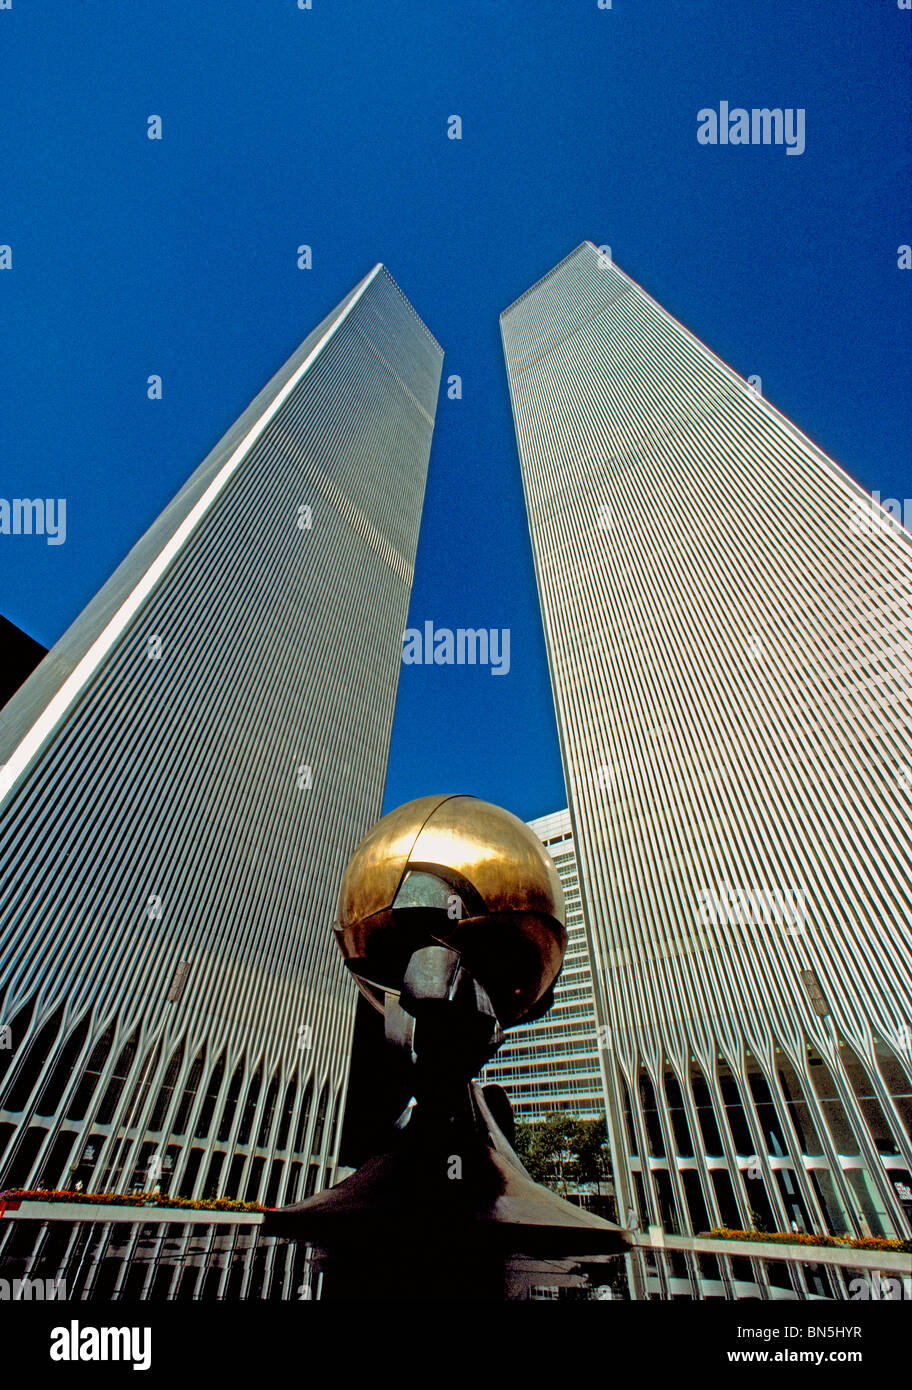 Sphere sculpture at the World Trade Center Stock Photo